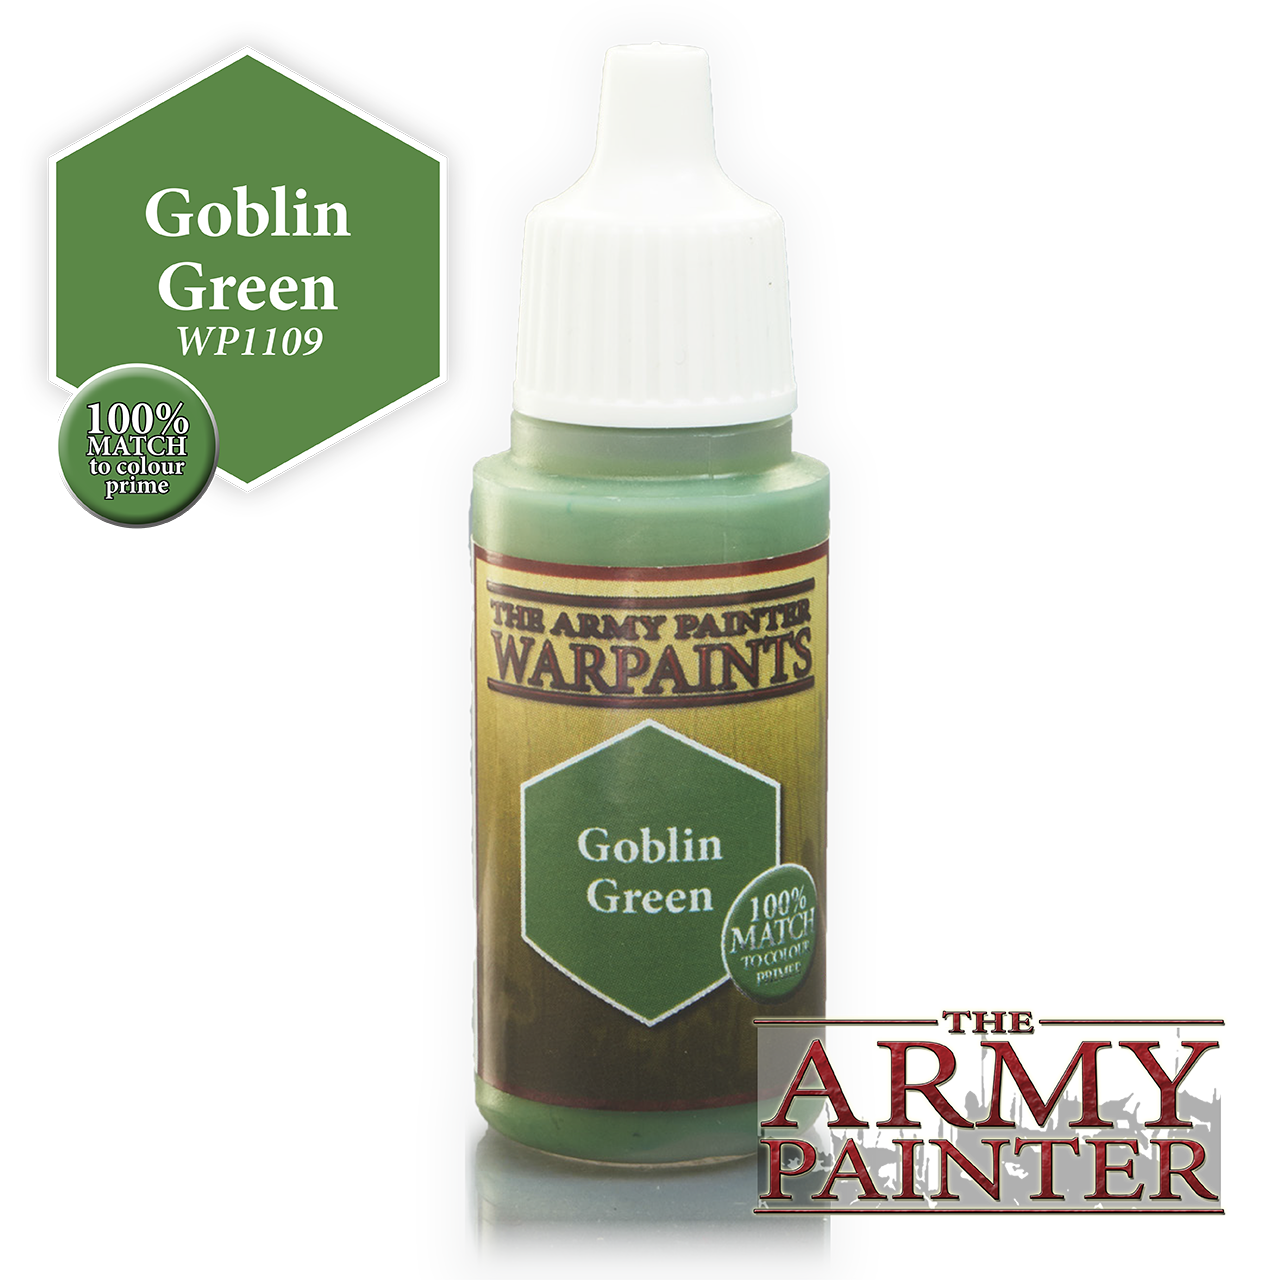 The Army Painter Warpaints: Goblin Green (18ml)